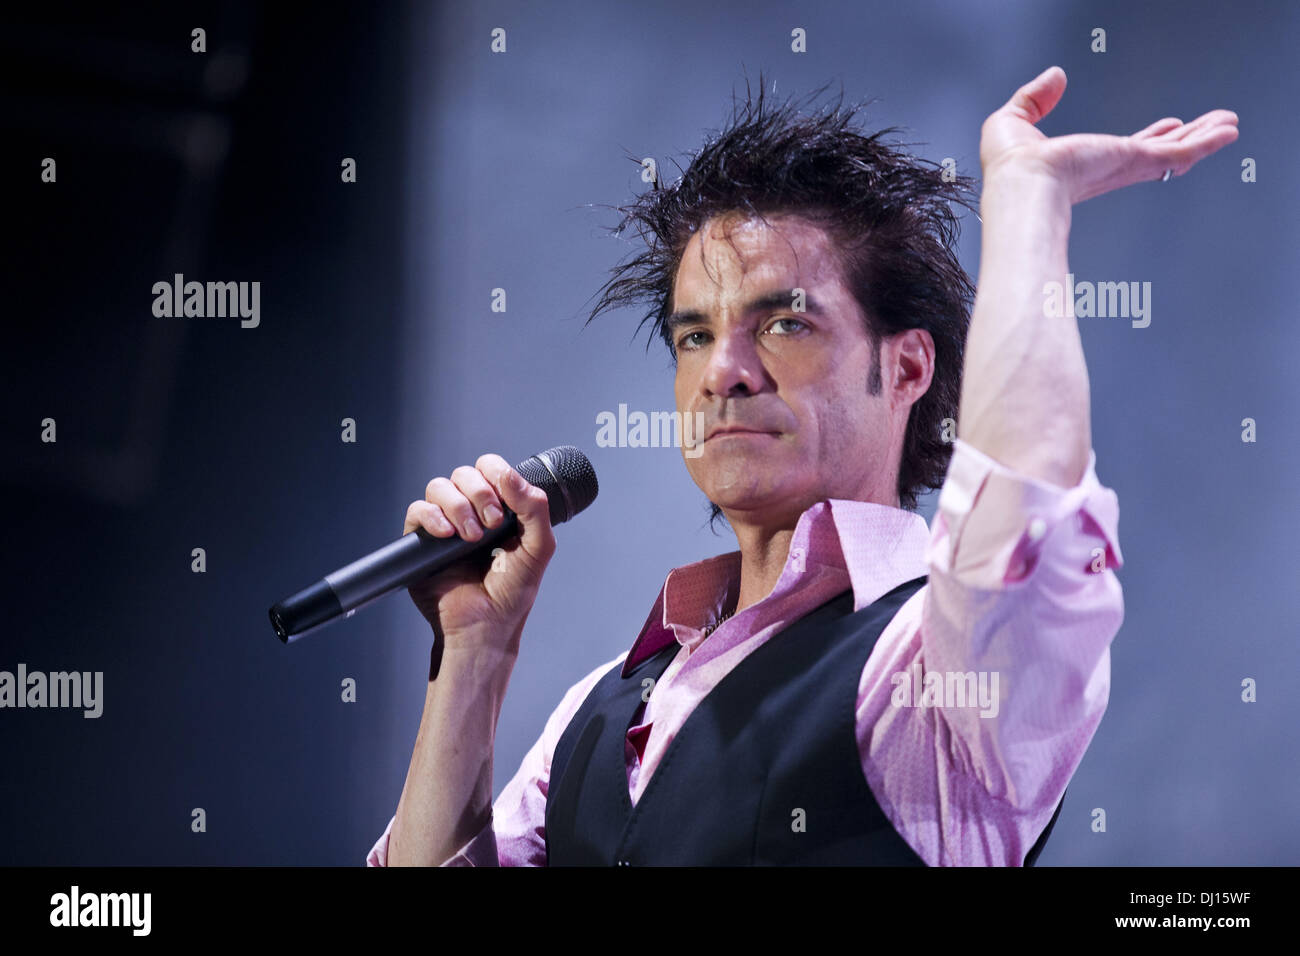 Chicago, Illinois, USA. 20th Aug, 2011. Vocalist PAT MONAHAN of Train performs at Charter One Pavilion on Northerly Island in Chicago, Illinois © Daniel DeSlover/ZUMAPRESS.com/Alamy Live News Stock Photo